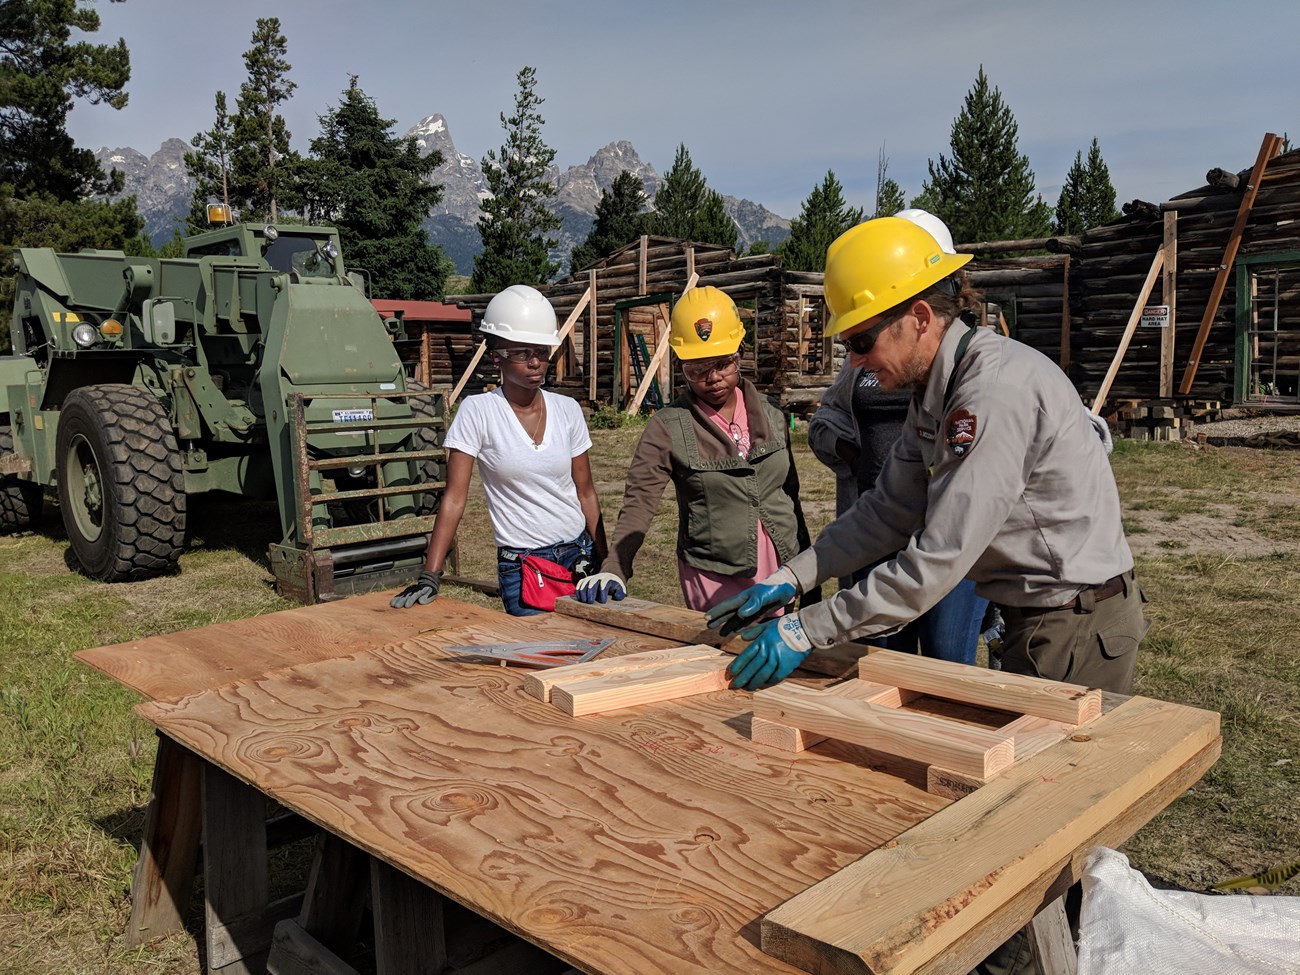 Four people wearing hard hats and tool belts work on a piece of wood in front of a large mountain range.